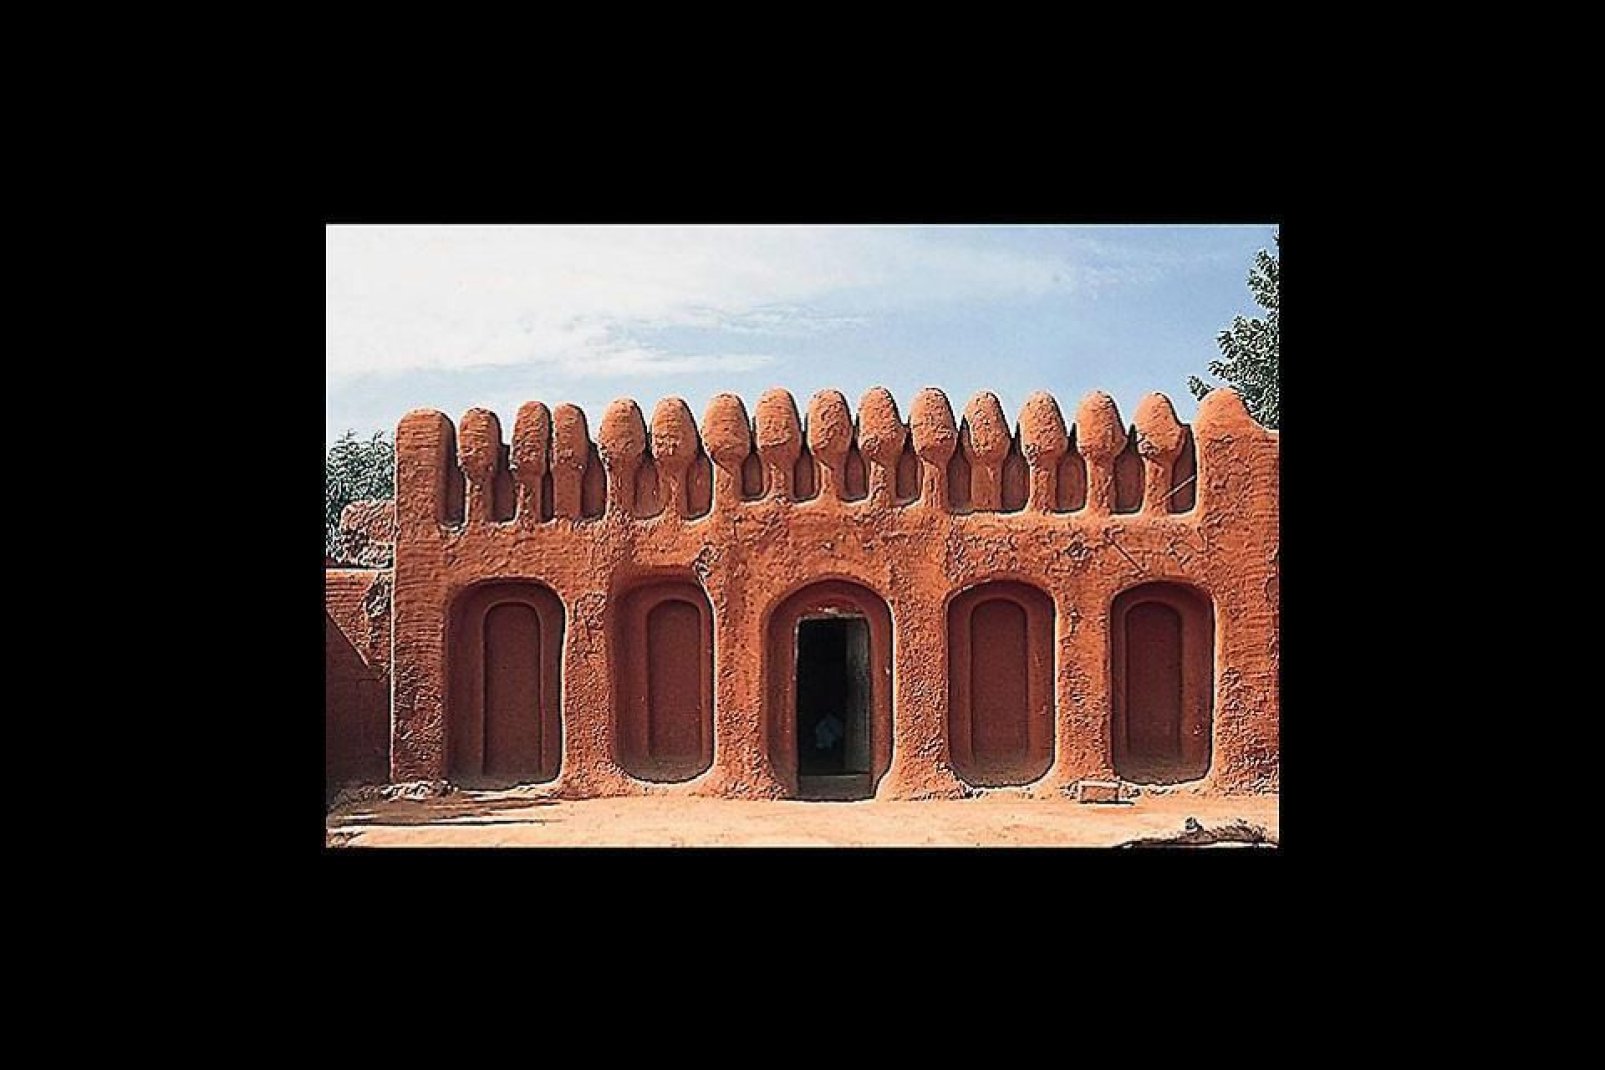 Ségou, in the south of the country, is known for its constructions made from sun-dried mud, of a wonderful dark ochre colour.